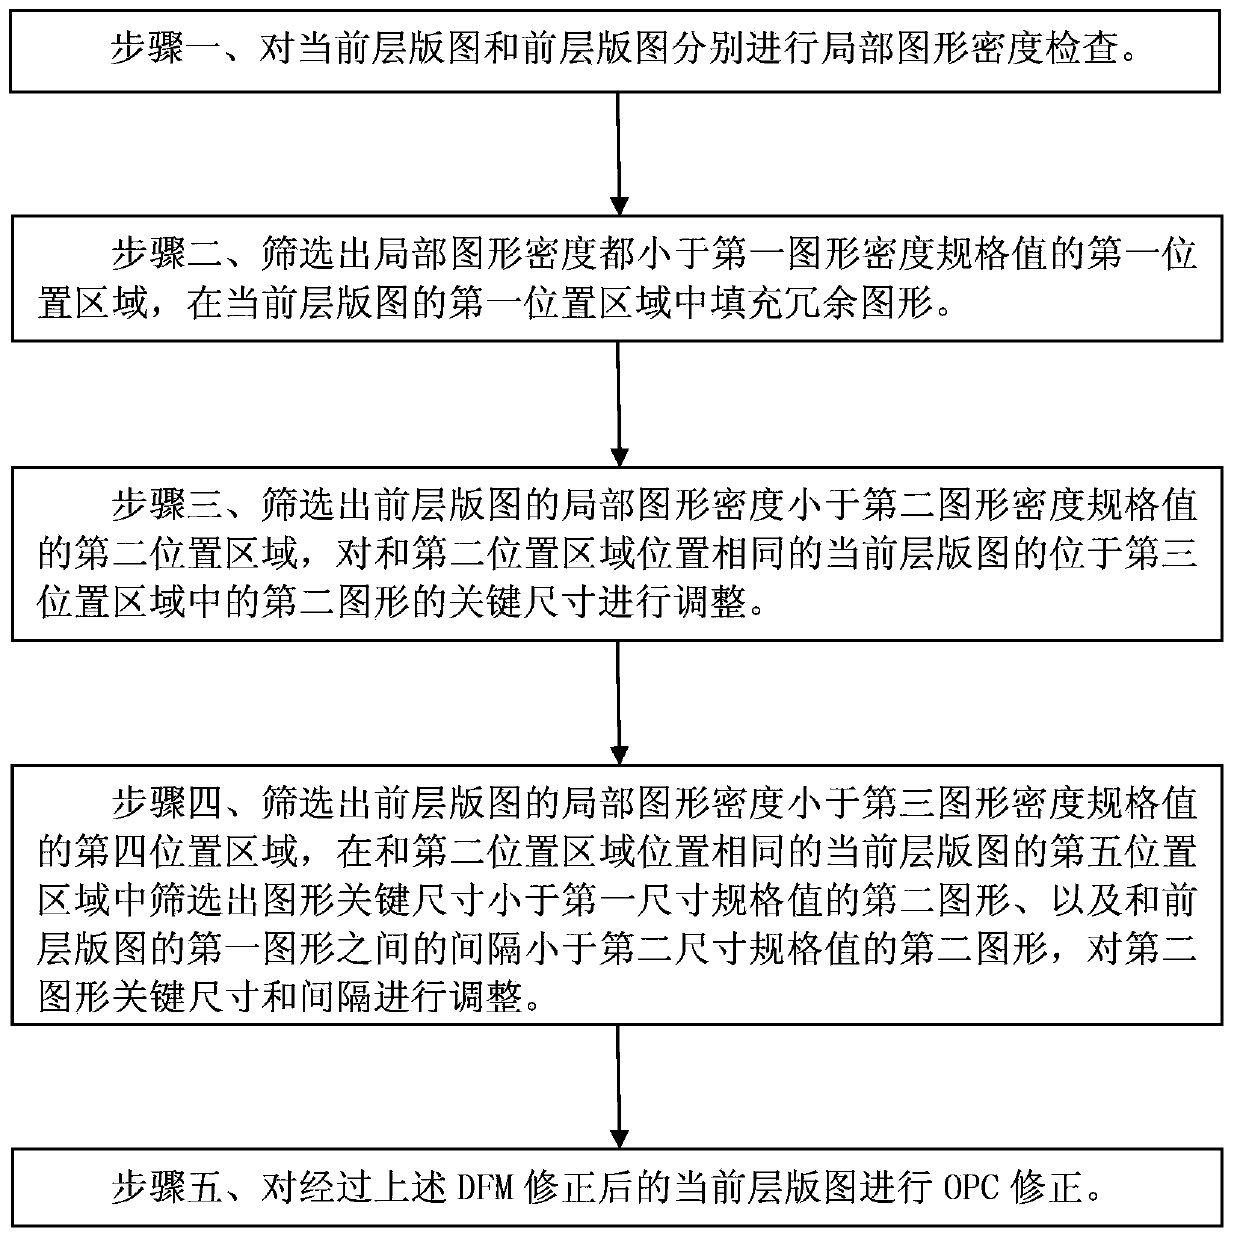 DFM (design for manufacturability) method for territory